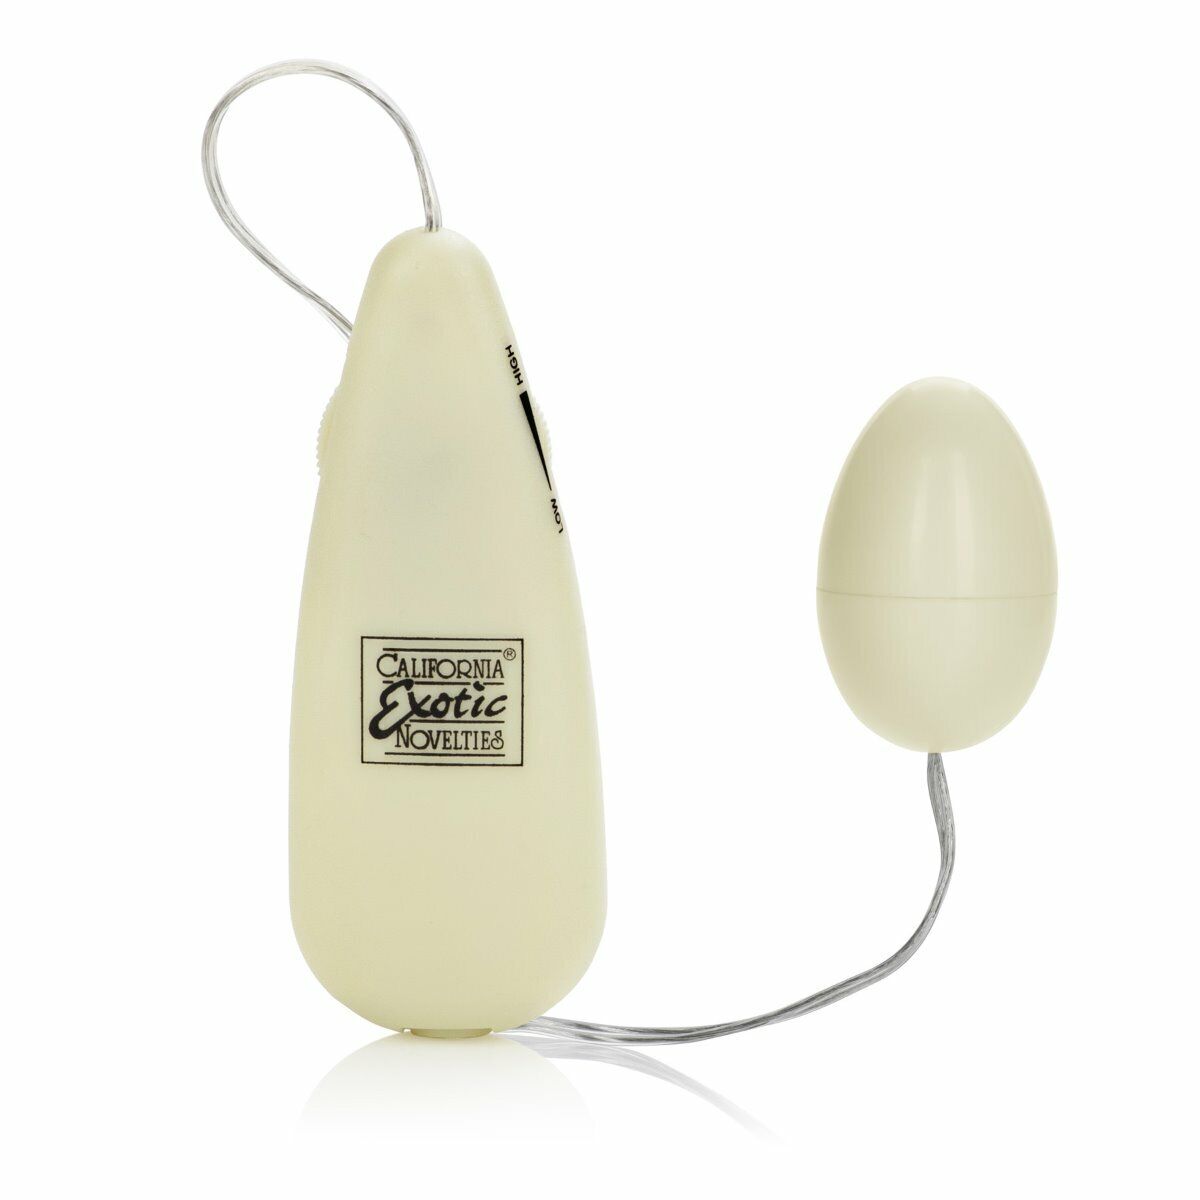 Glow-in-the-Dark Vibrating Glowing Pocket Bullet Vibe Sex-toys for Women